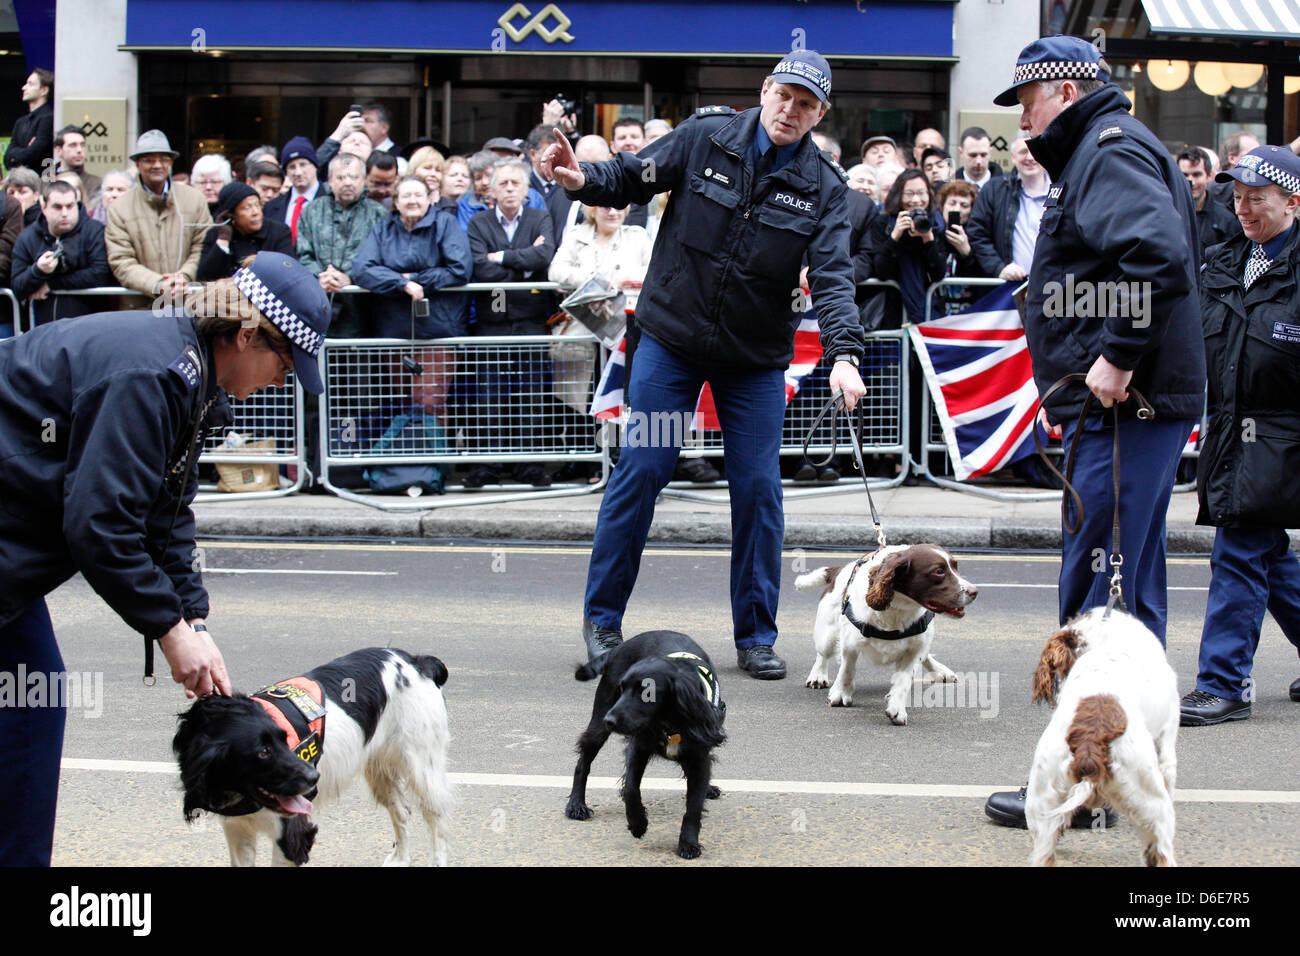 LONDON 17th of April 2013, The funeral of former prime minister Margaret Thatcher was held at St. Paul's Cathedral this morning. Police supervision was extremely strict as police dogs searched up and down Ludgate Hill. Stock Photo